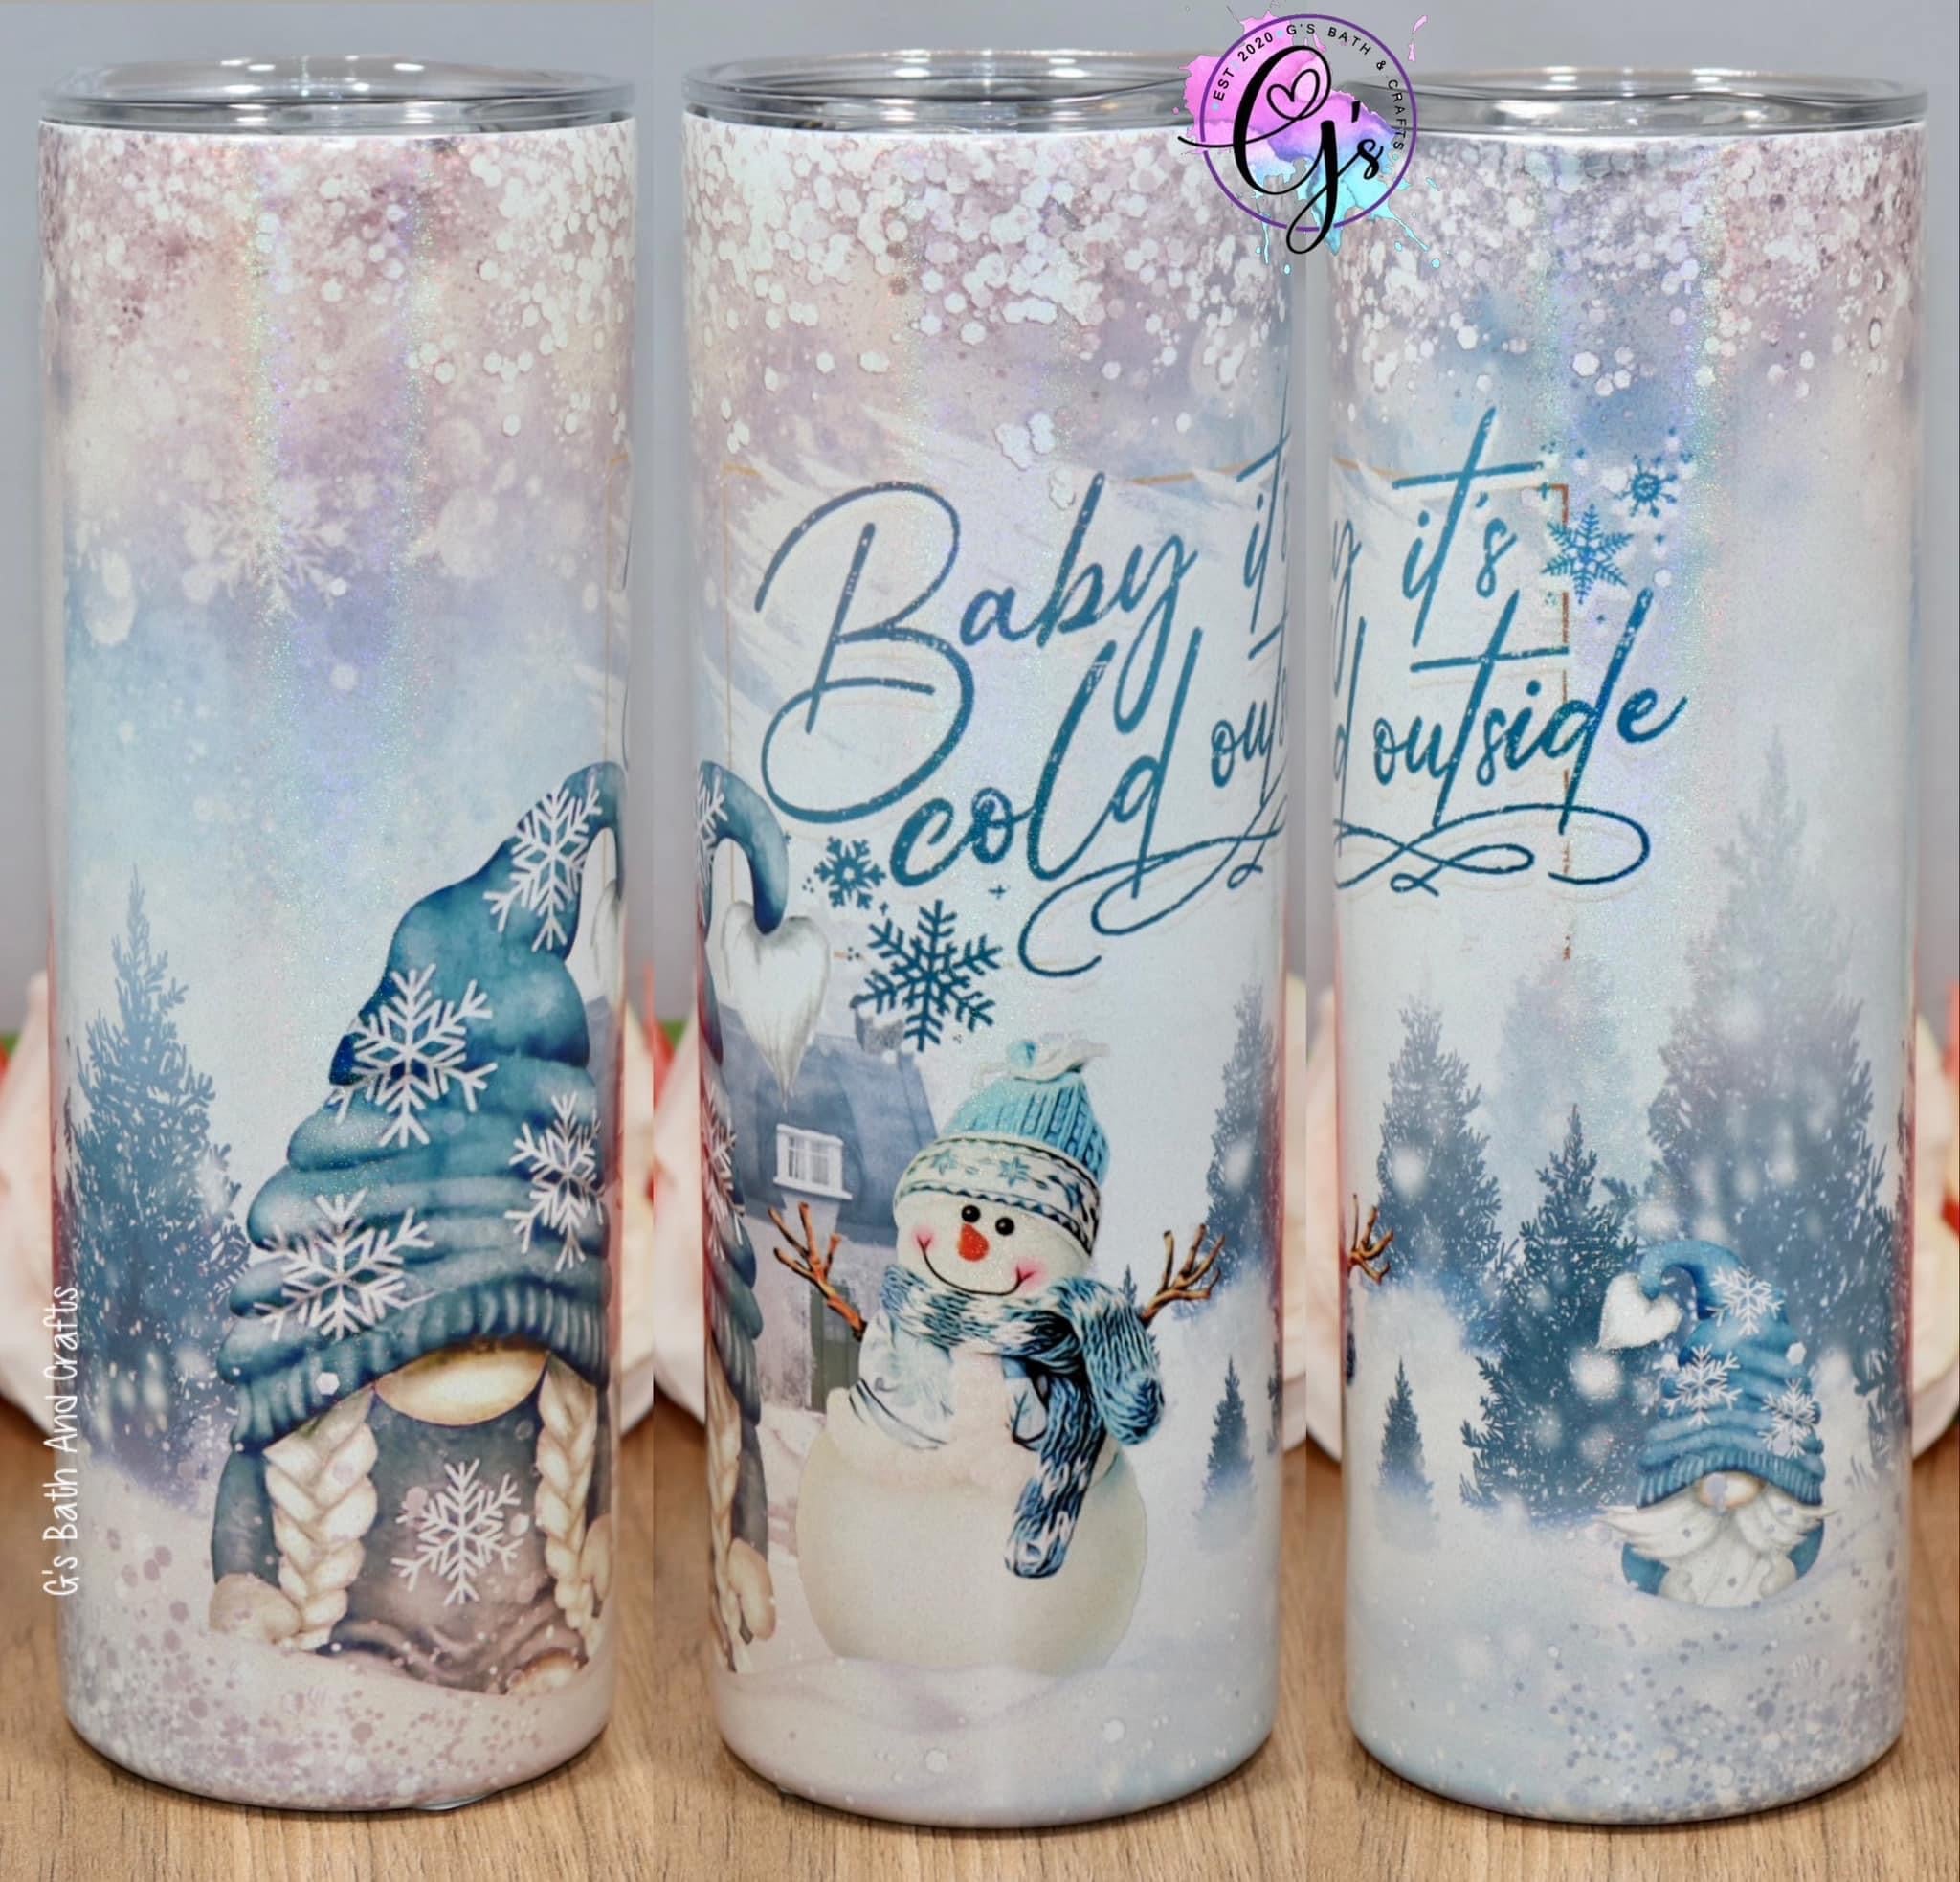 Baby it's Cold Tumbler